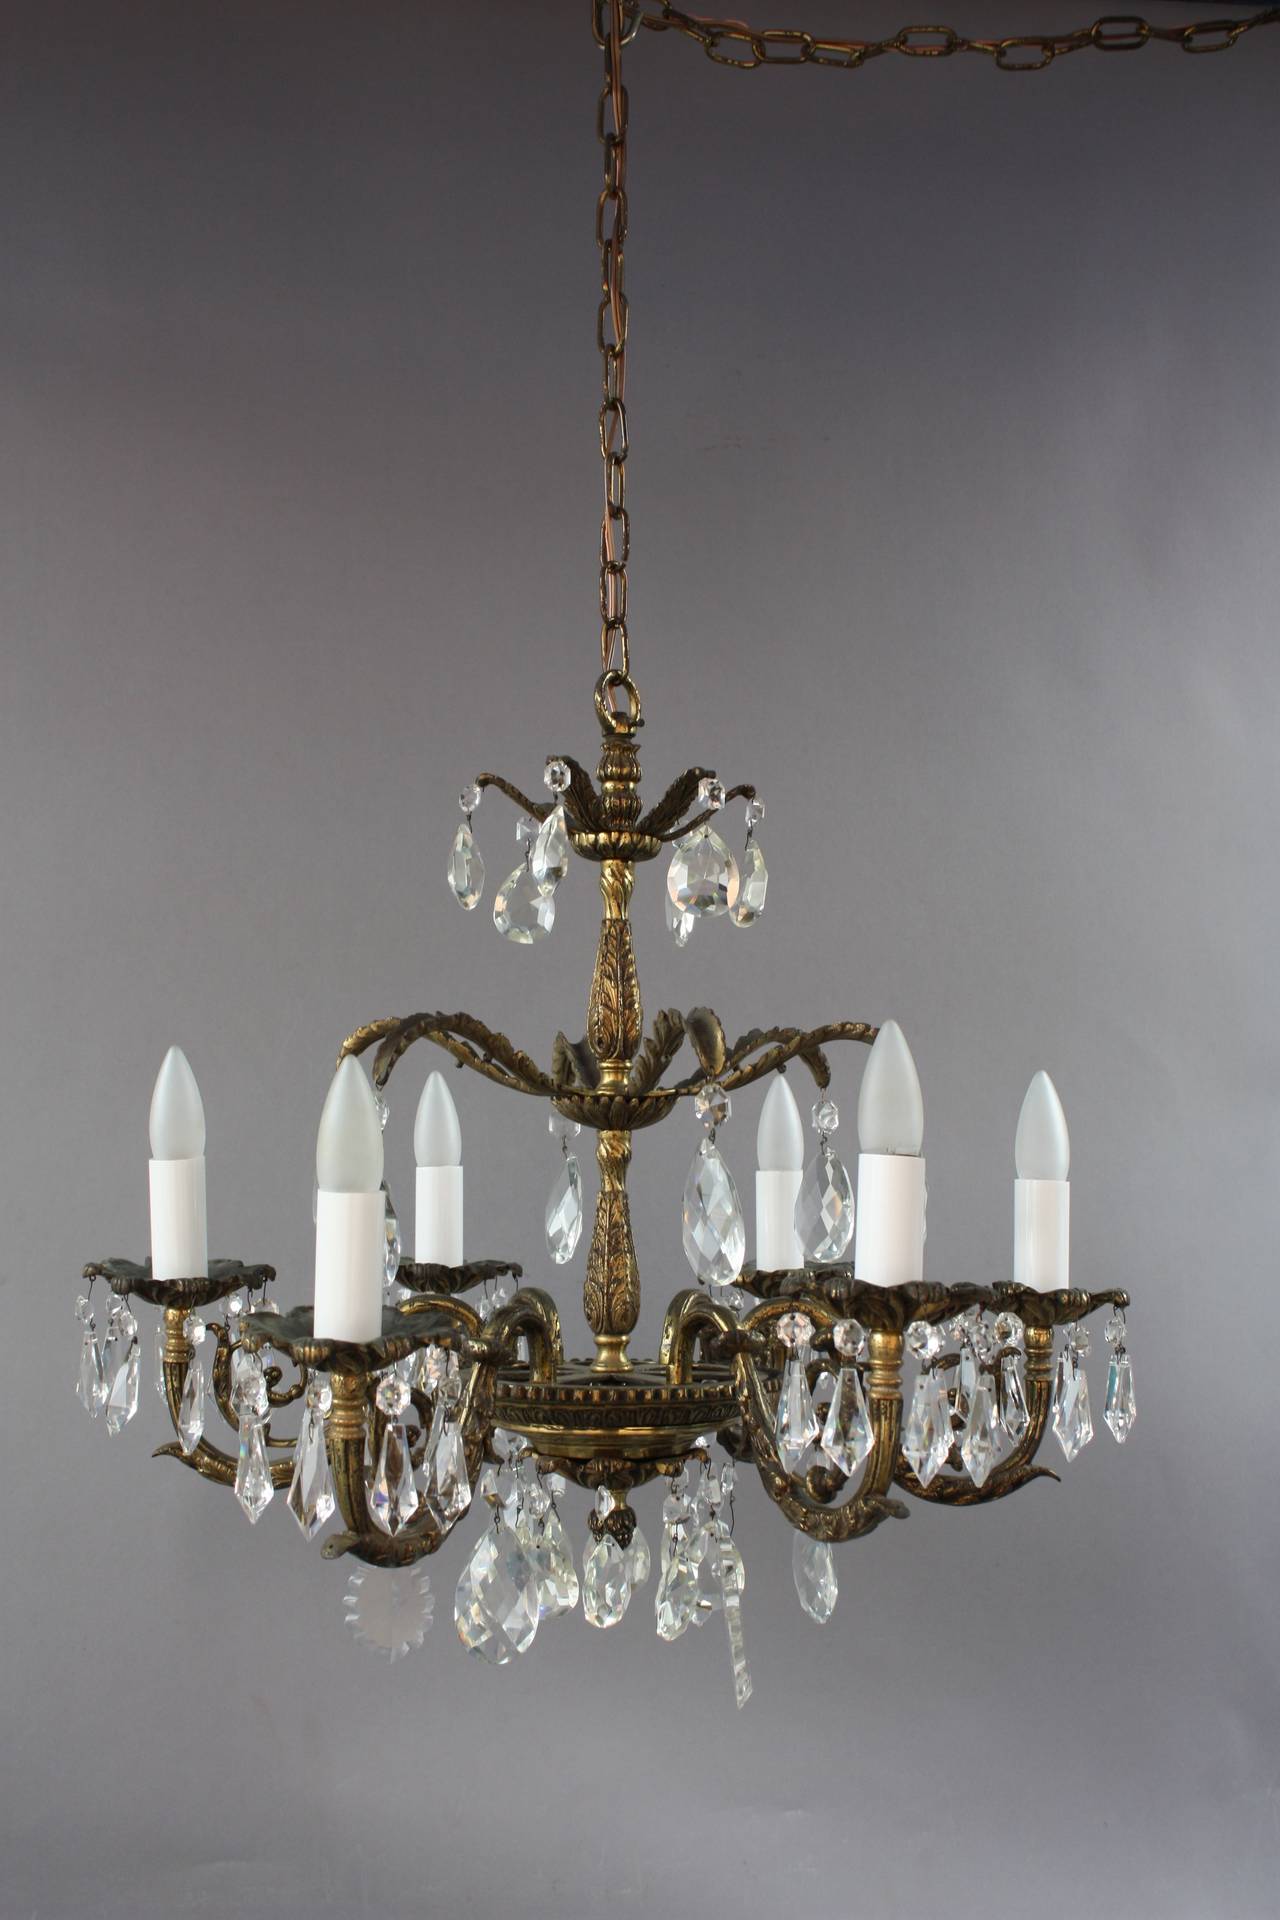 North American Antique One of Two Brass and Crystal Chandeliers, circa 1930s